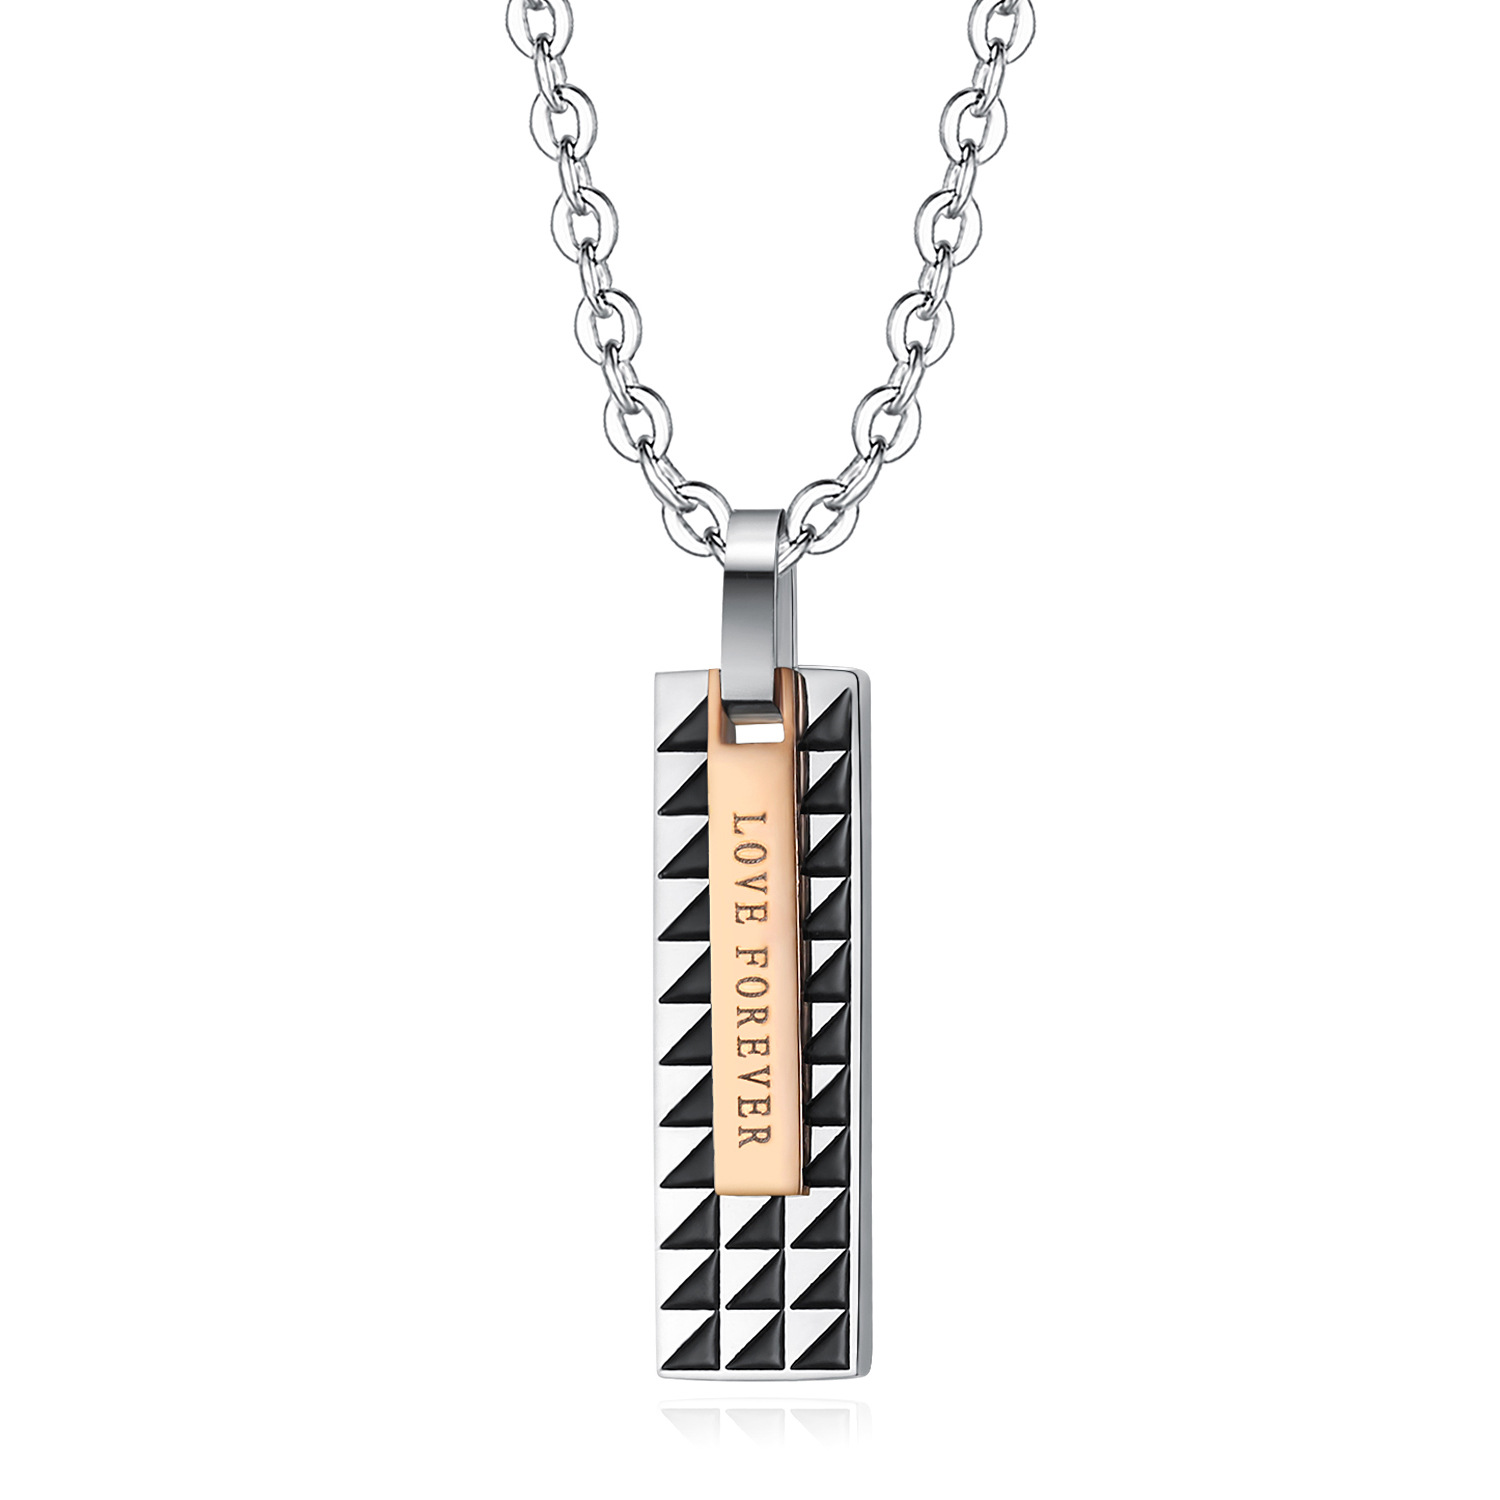 1:Rose Gold Single Pendant Without Chain (31x8mm)